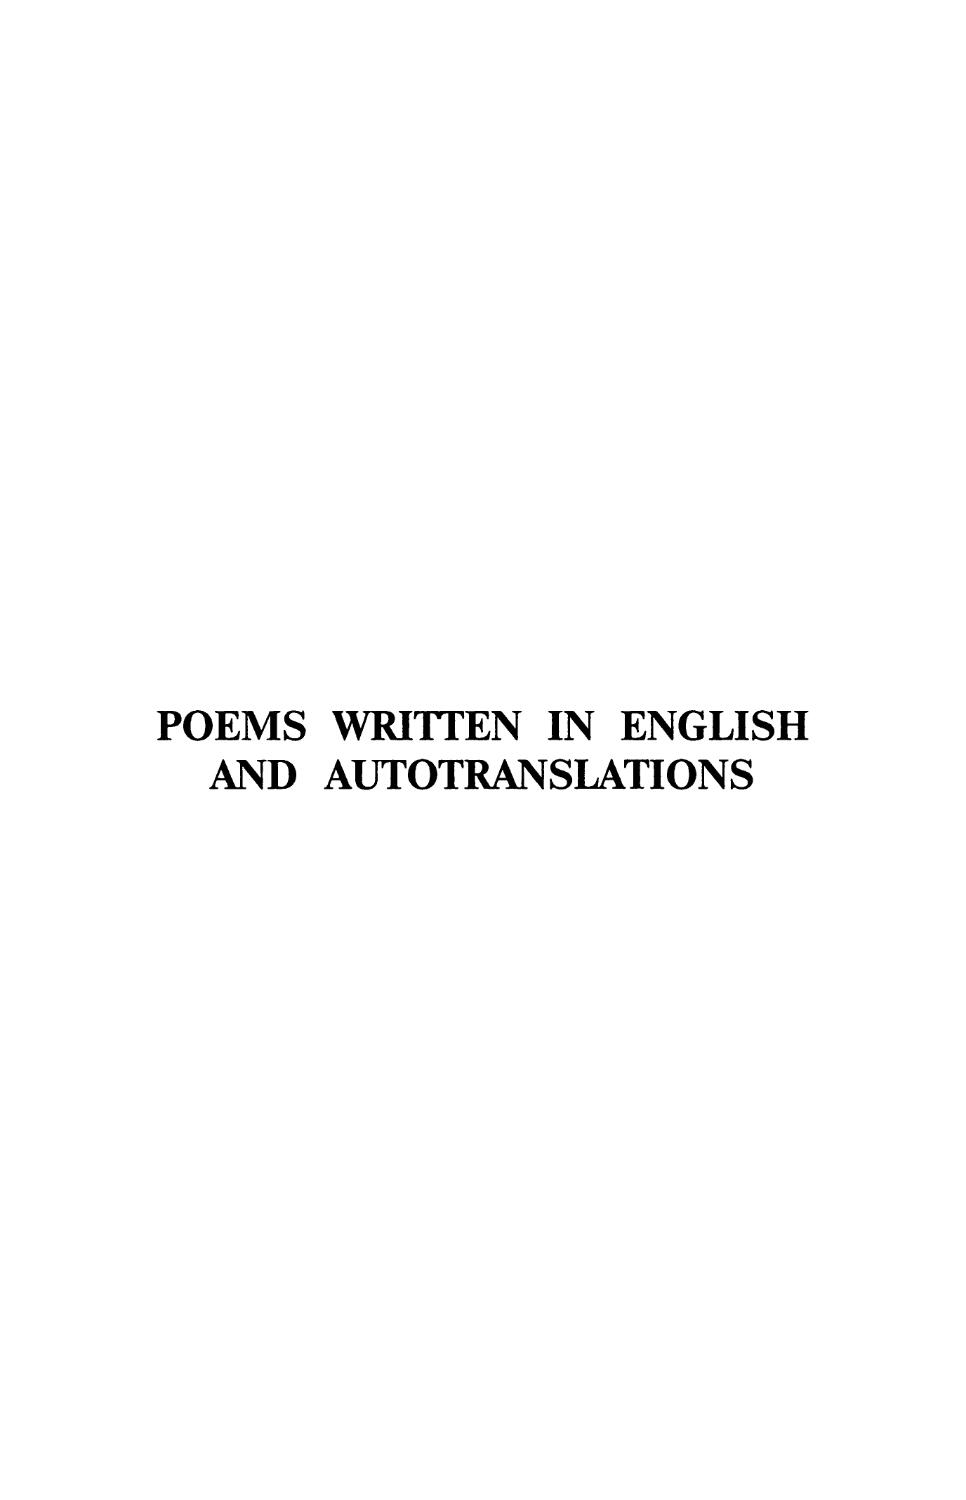 POEMS WRITTEN IN ENGLISH AND AUTOTRANSLATIONS